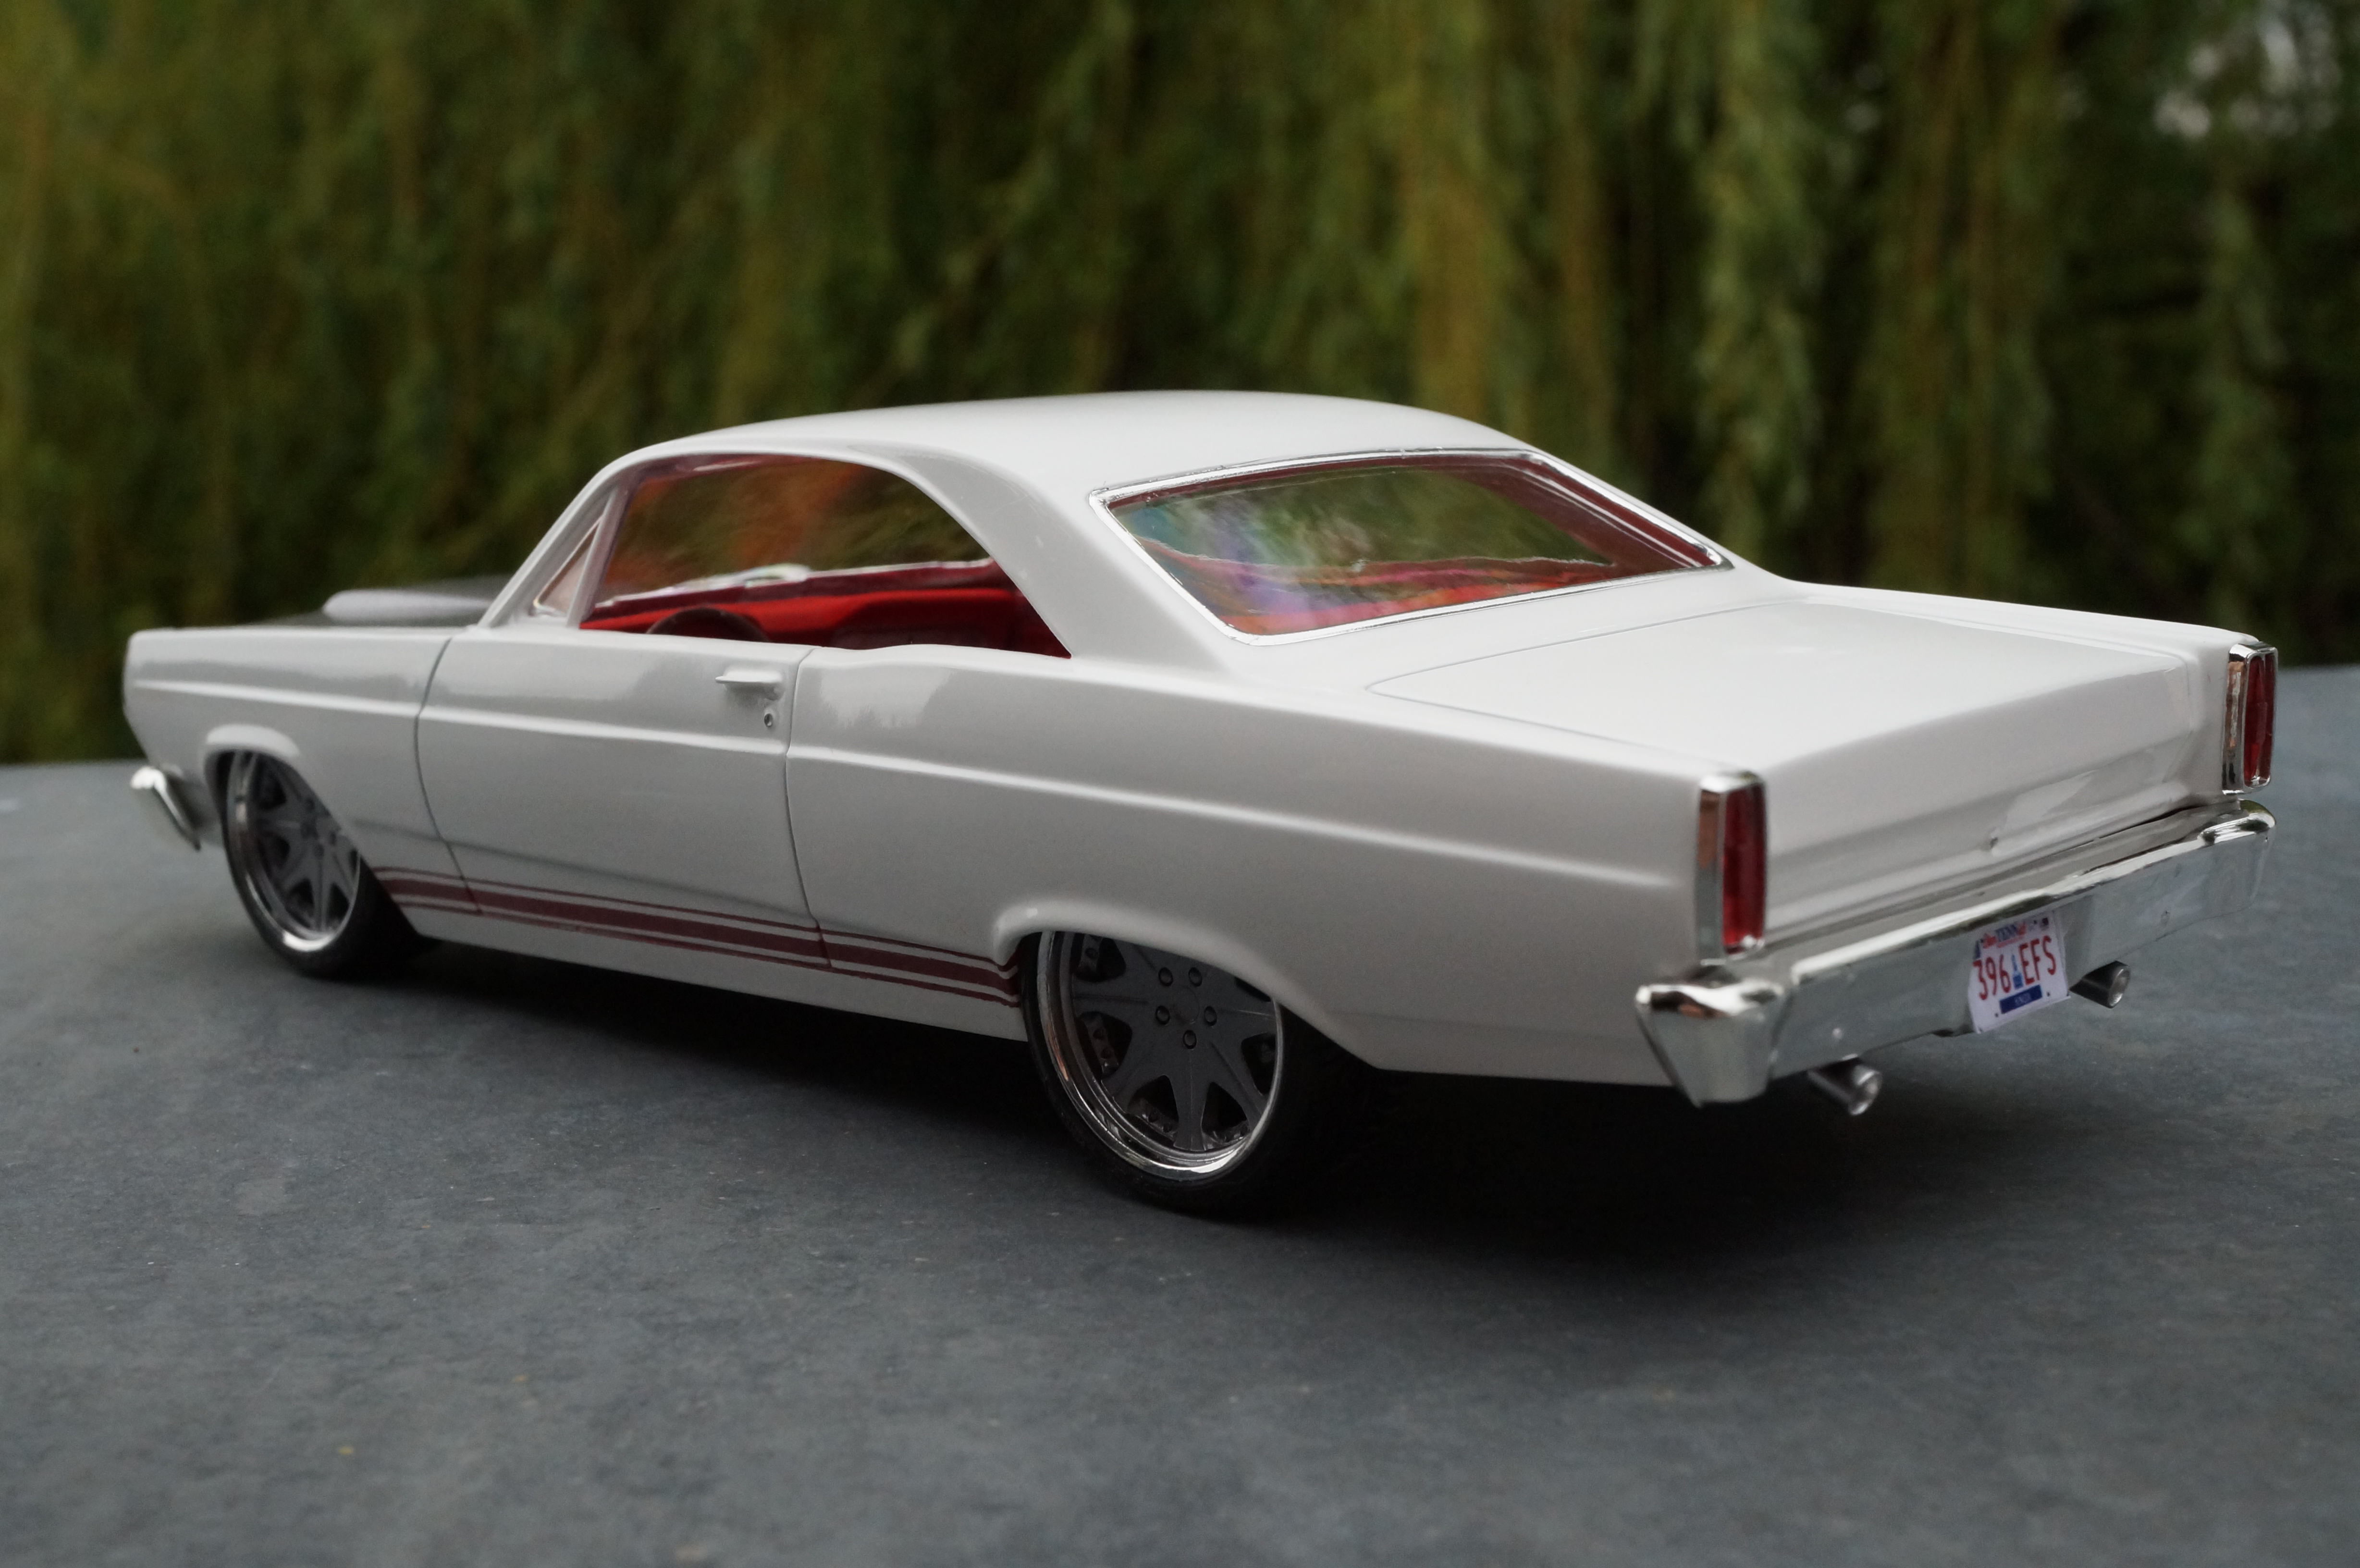 66 Ford Fairlane 427 pro touring , terminée !!! - Page 2 1505020220248898213227395